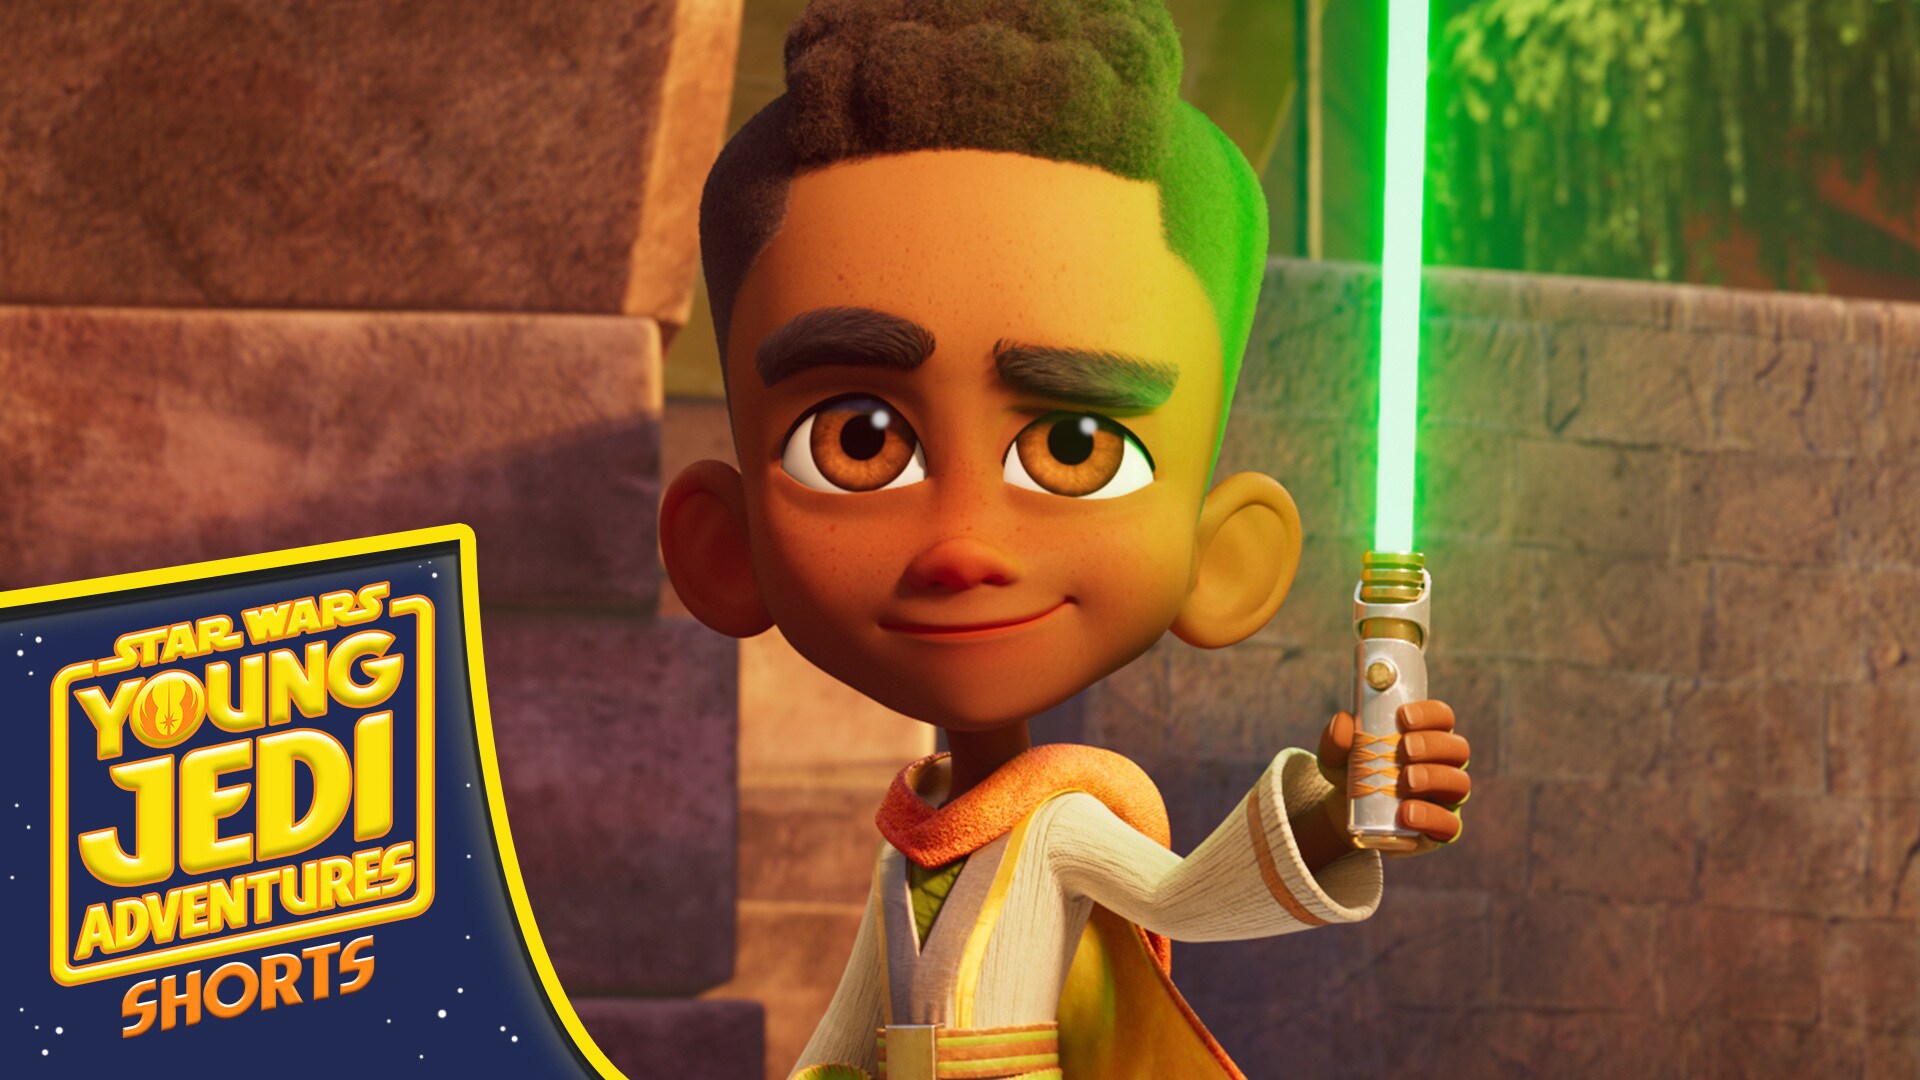 Meet the Young Jedi | Young Jedi Adventures | Short 1